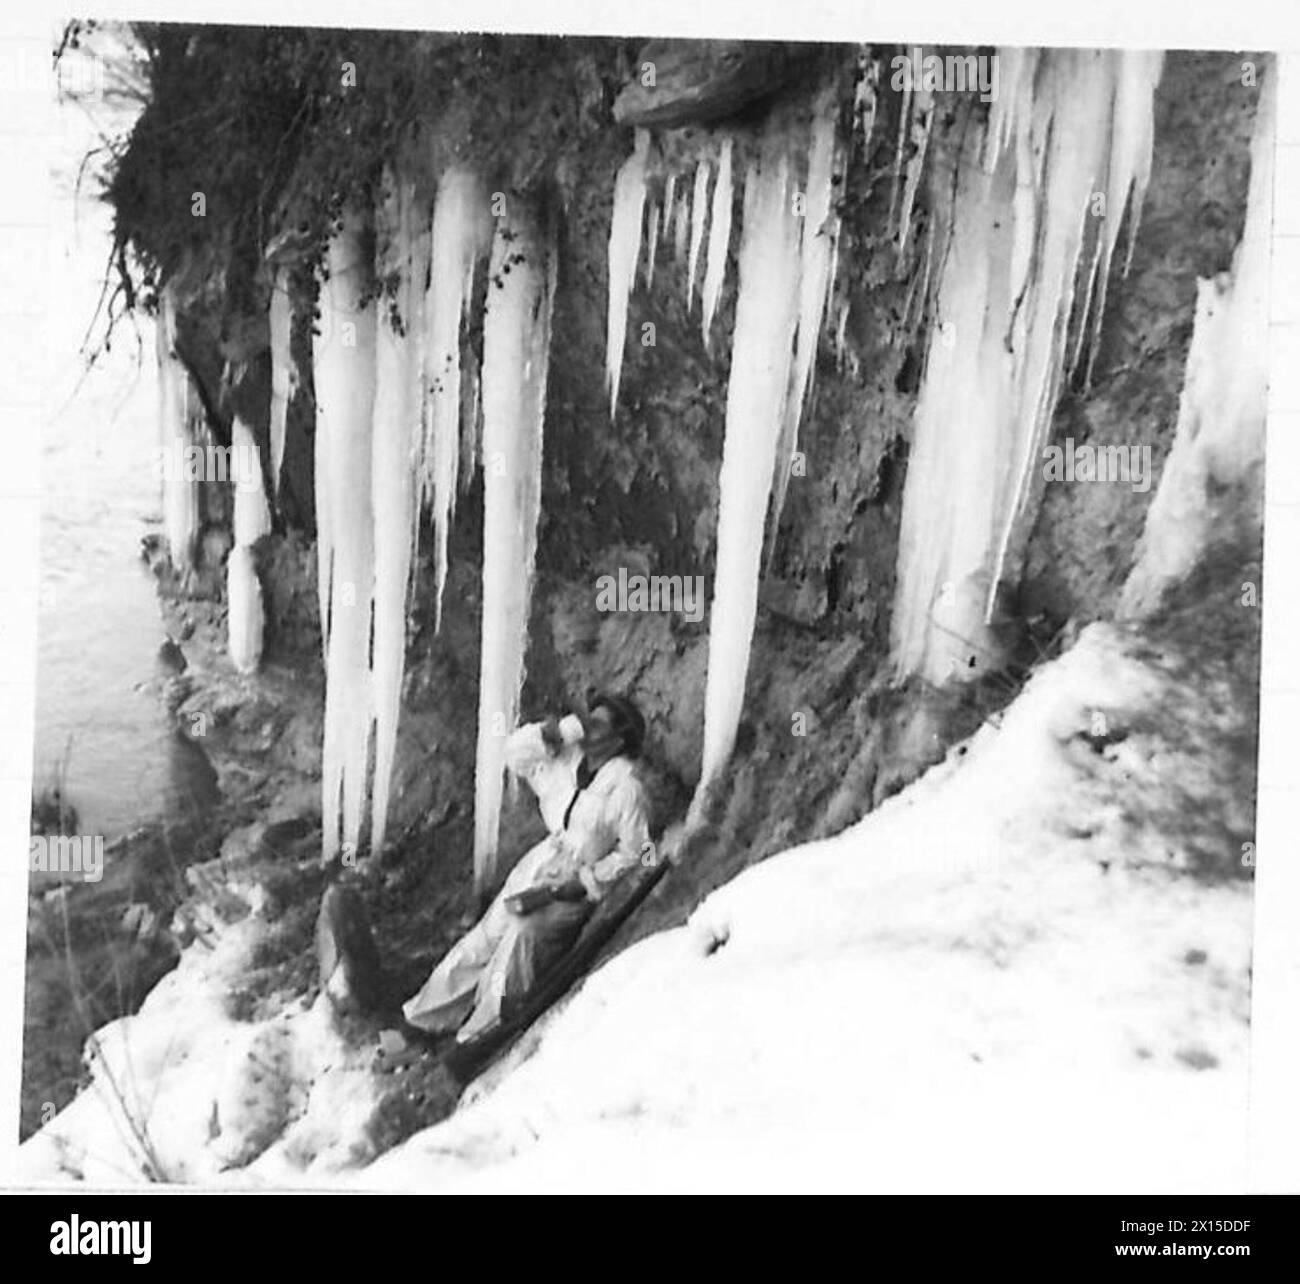 FIFTH ARMY : VARIOUS - Sapper Raymond Vass, 525 Field Sqn. R.E., of 7 Glebe Road, Crondall, near Farnham, Surrey, breaks for lunch during work on a ferry across the River Santerno. Bitter cold had produced these huge icicles. Spr. Vass wears a snowsuit whilst working, as the area ia under enemy observation from Tosignano British Army Stock Photo